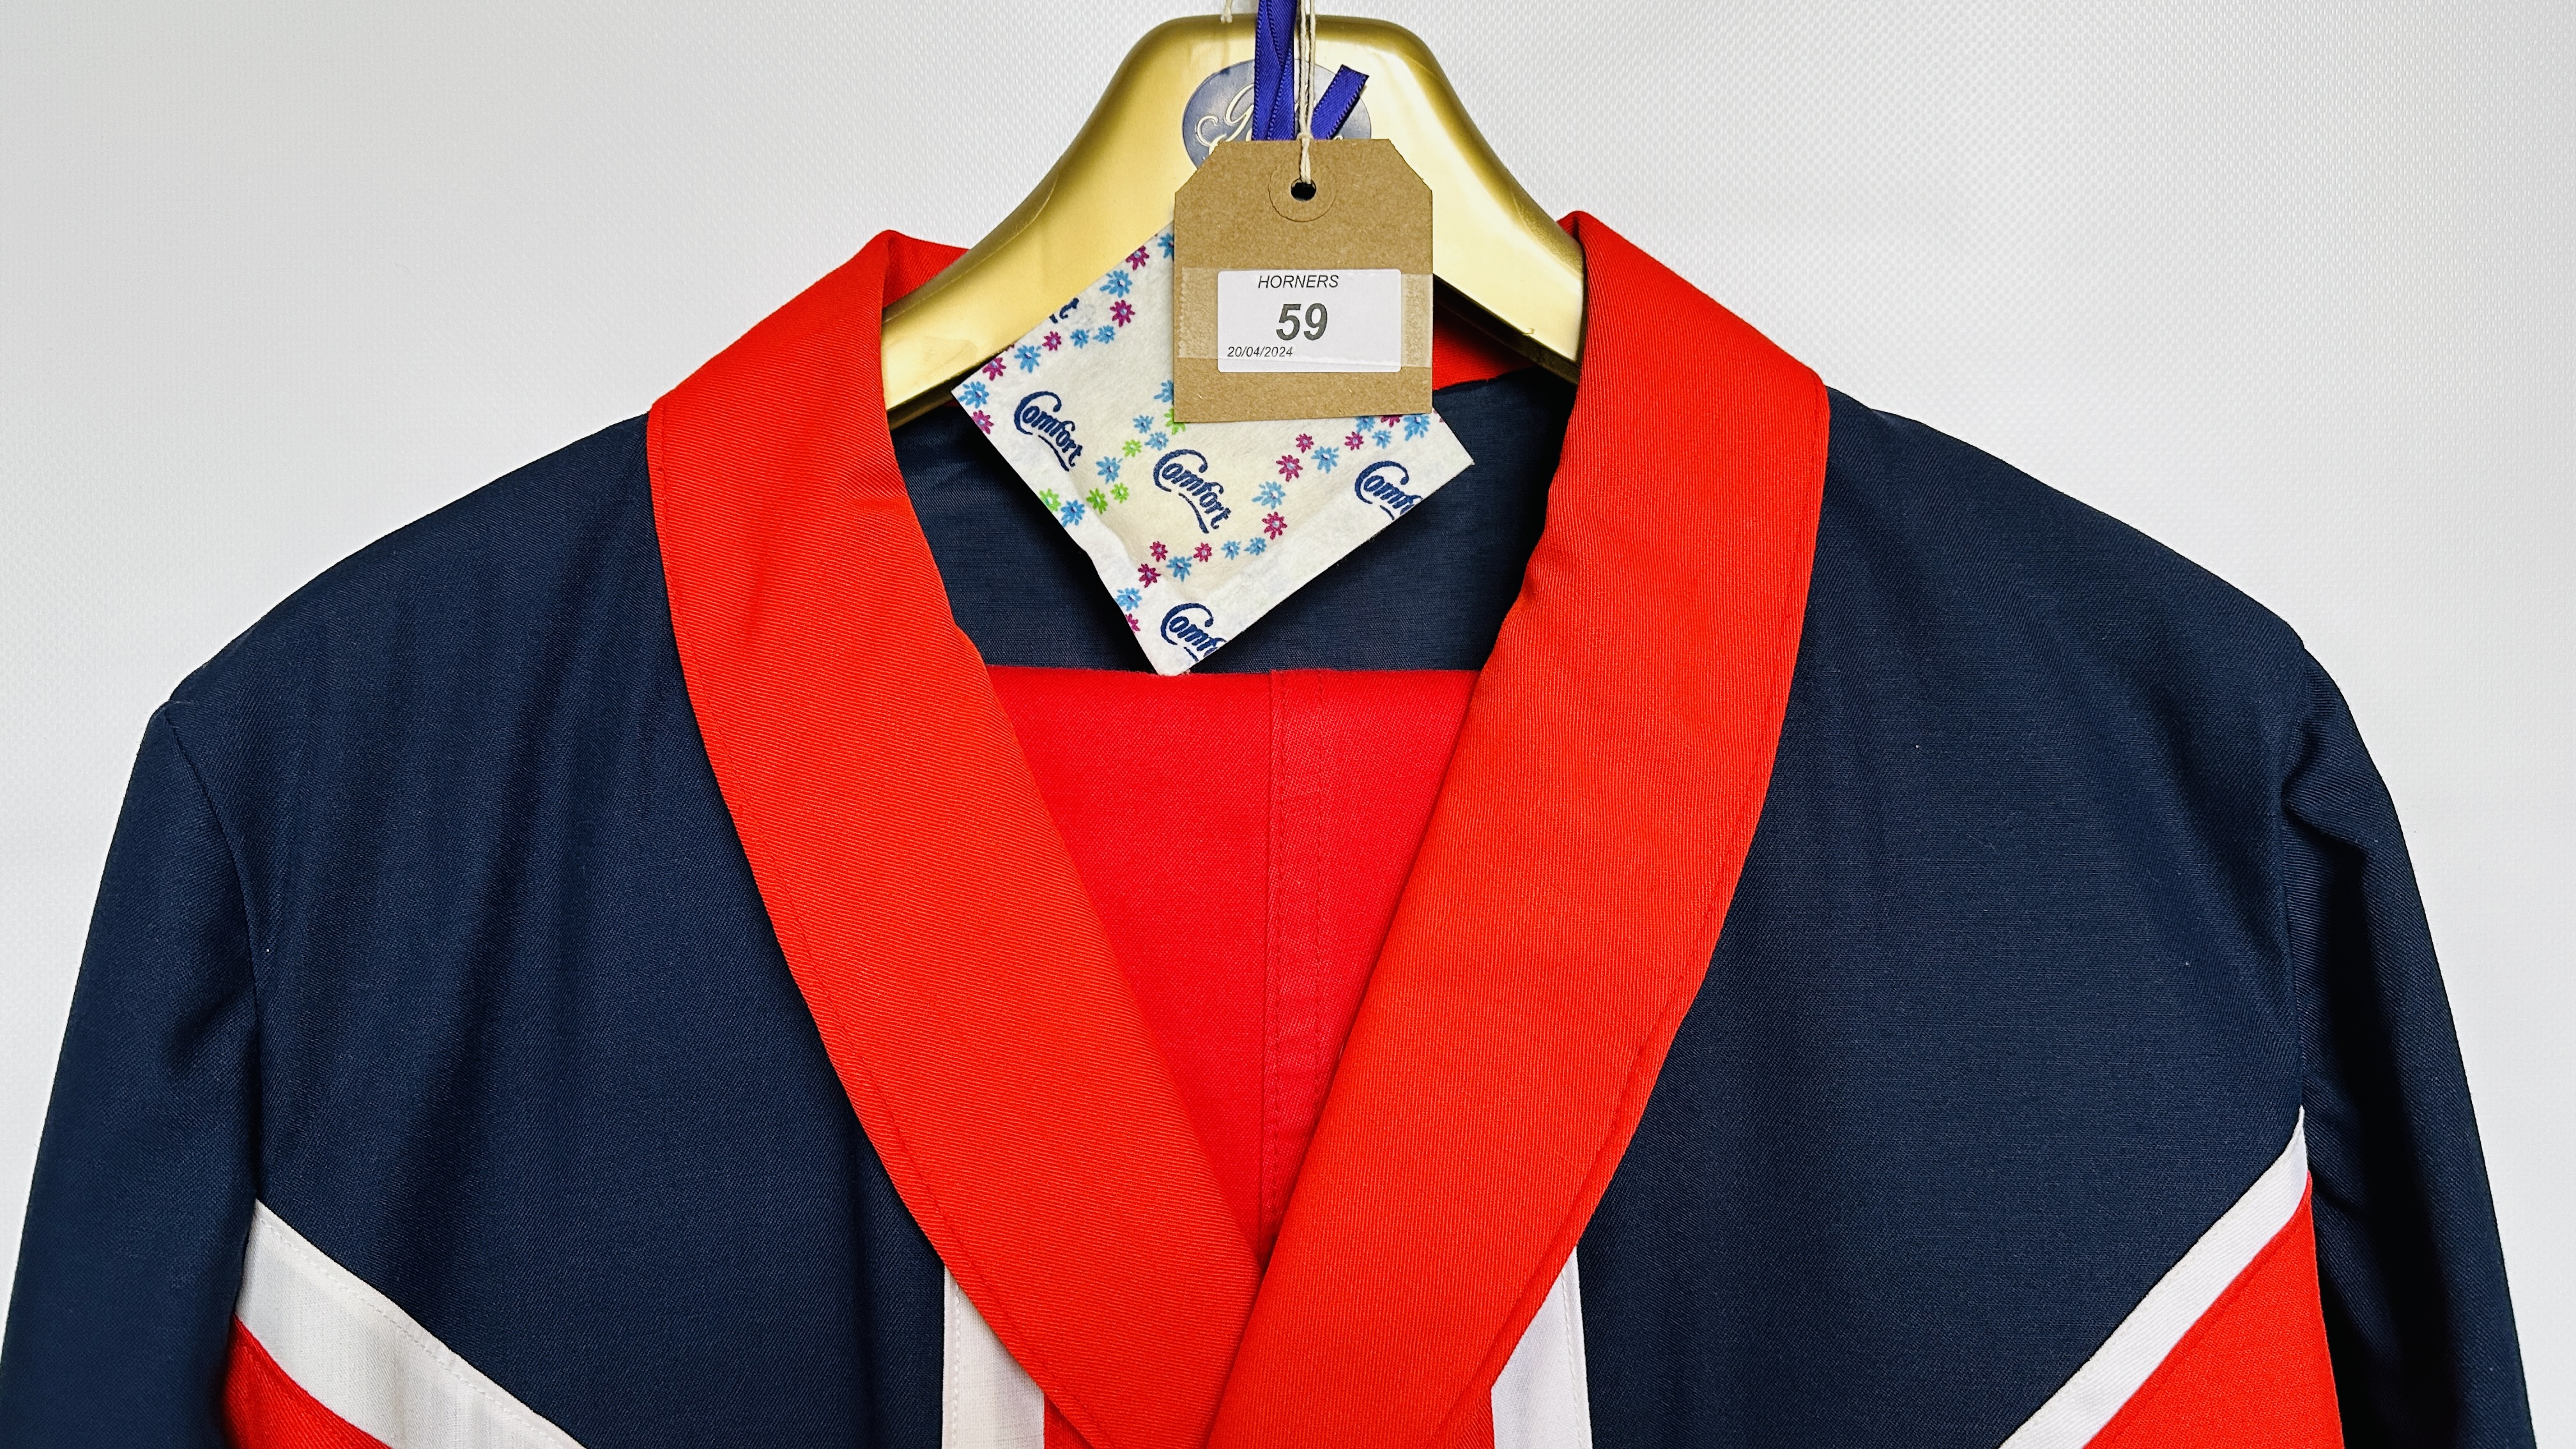 1960S UNION JACKET SUIT, RED TROUSERS - JACKET RED/WHITE/BLUE - A/F CONDITION, SOLD AS SEEN. - Image 2 of 12